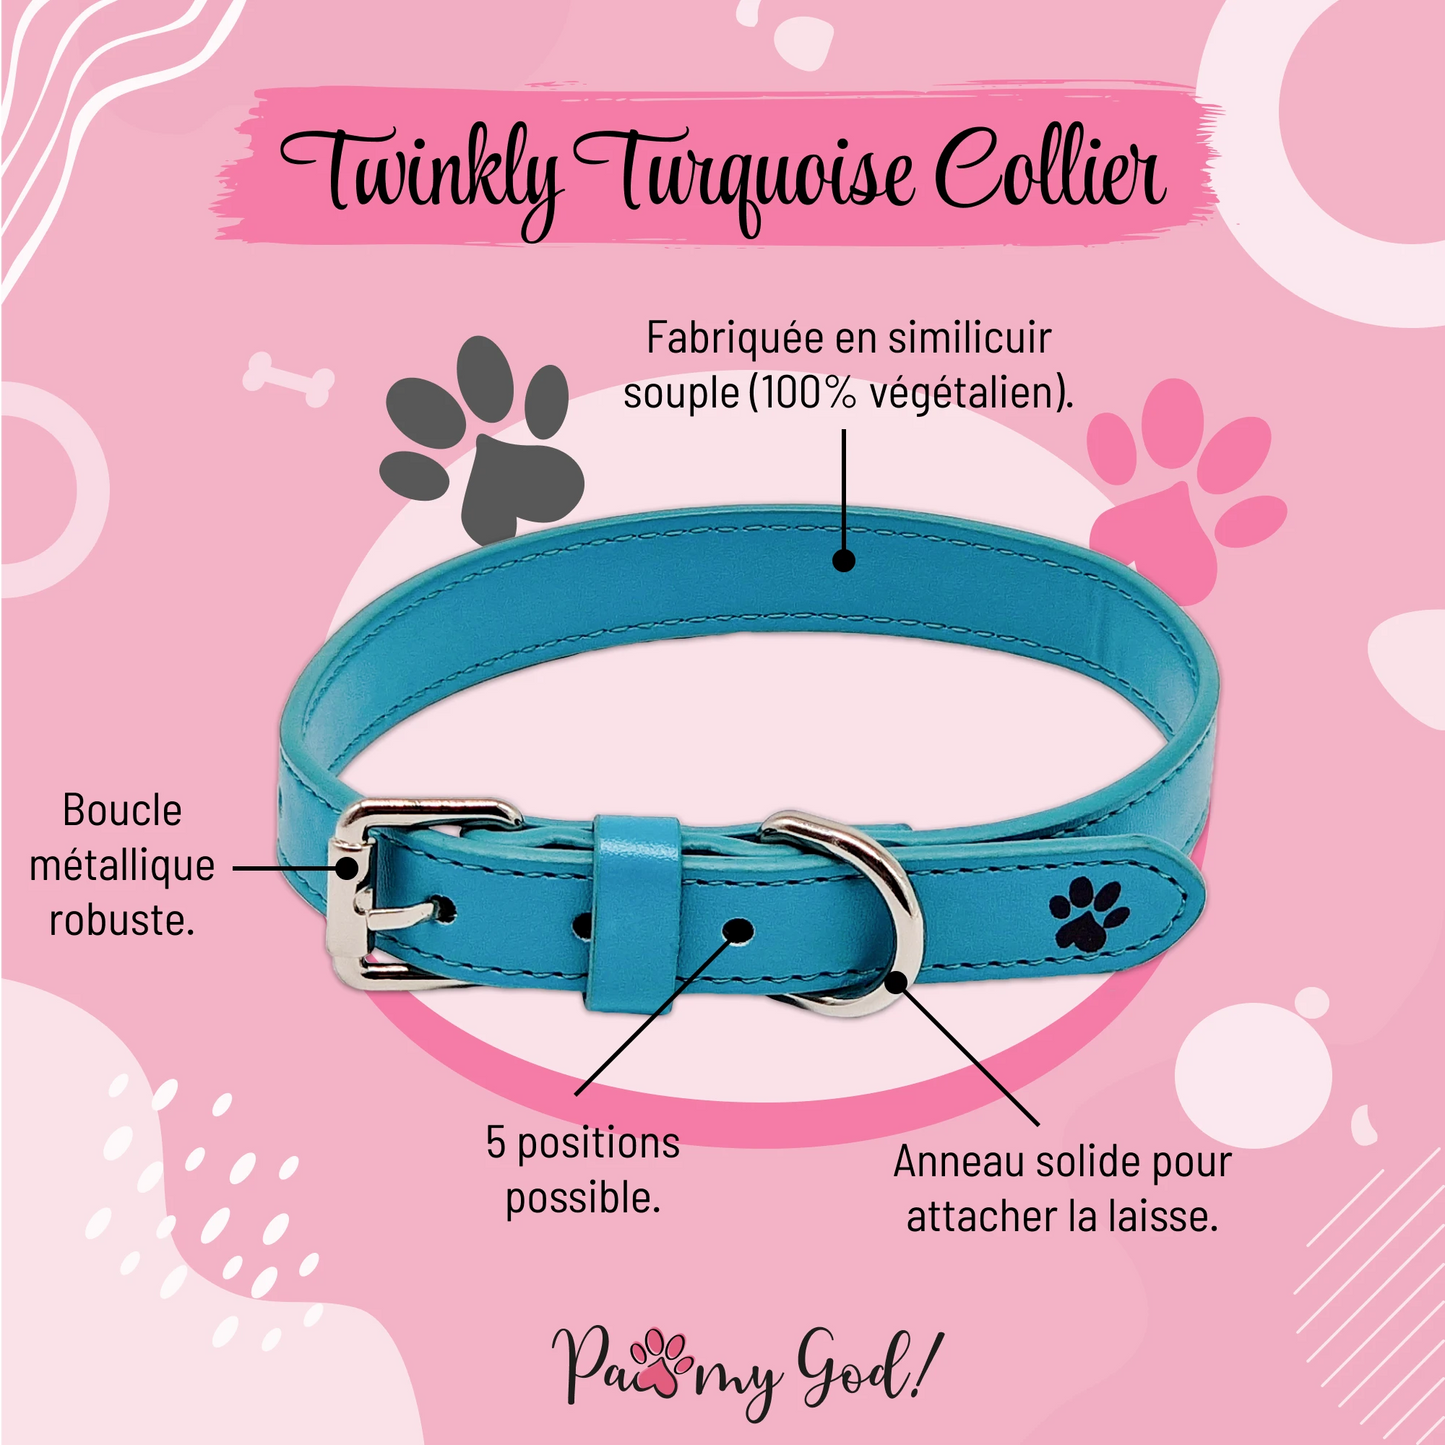 Twinkly Turquoise Collar